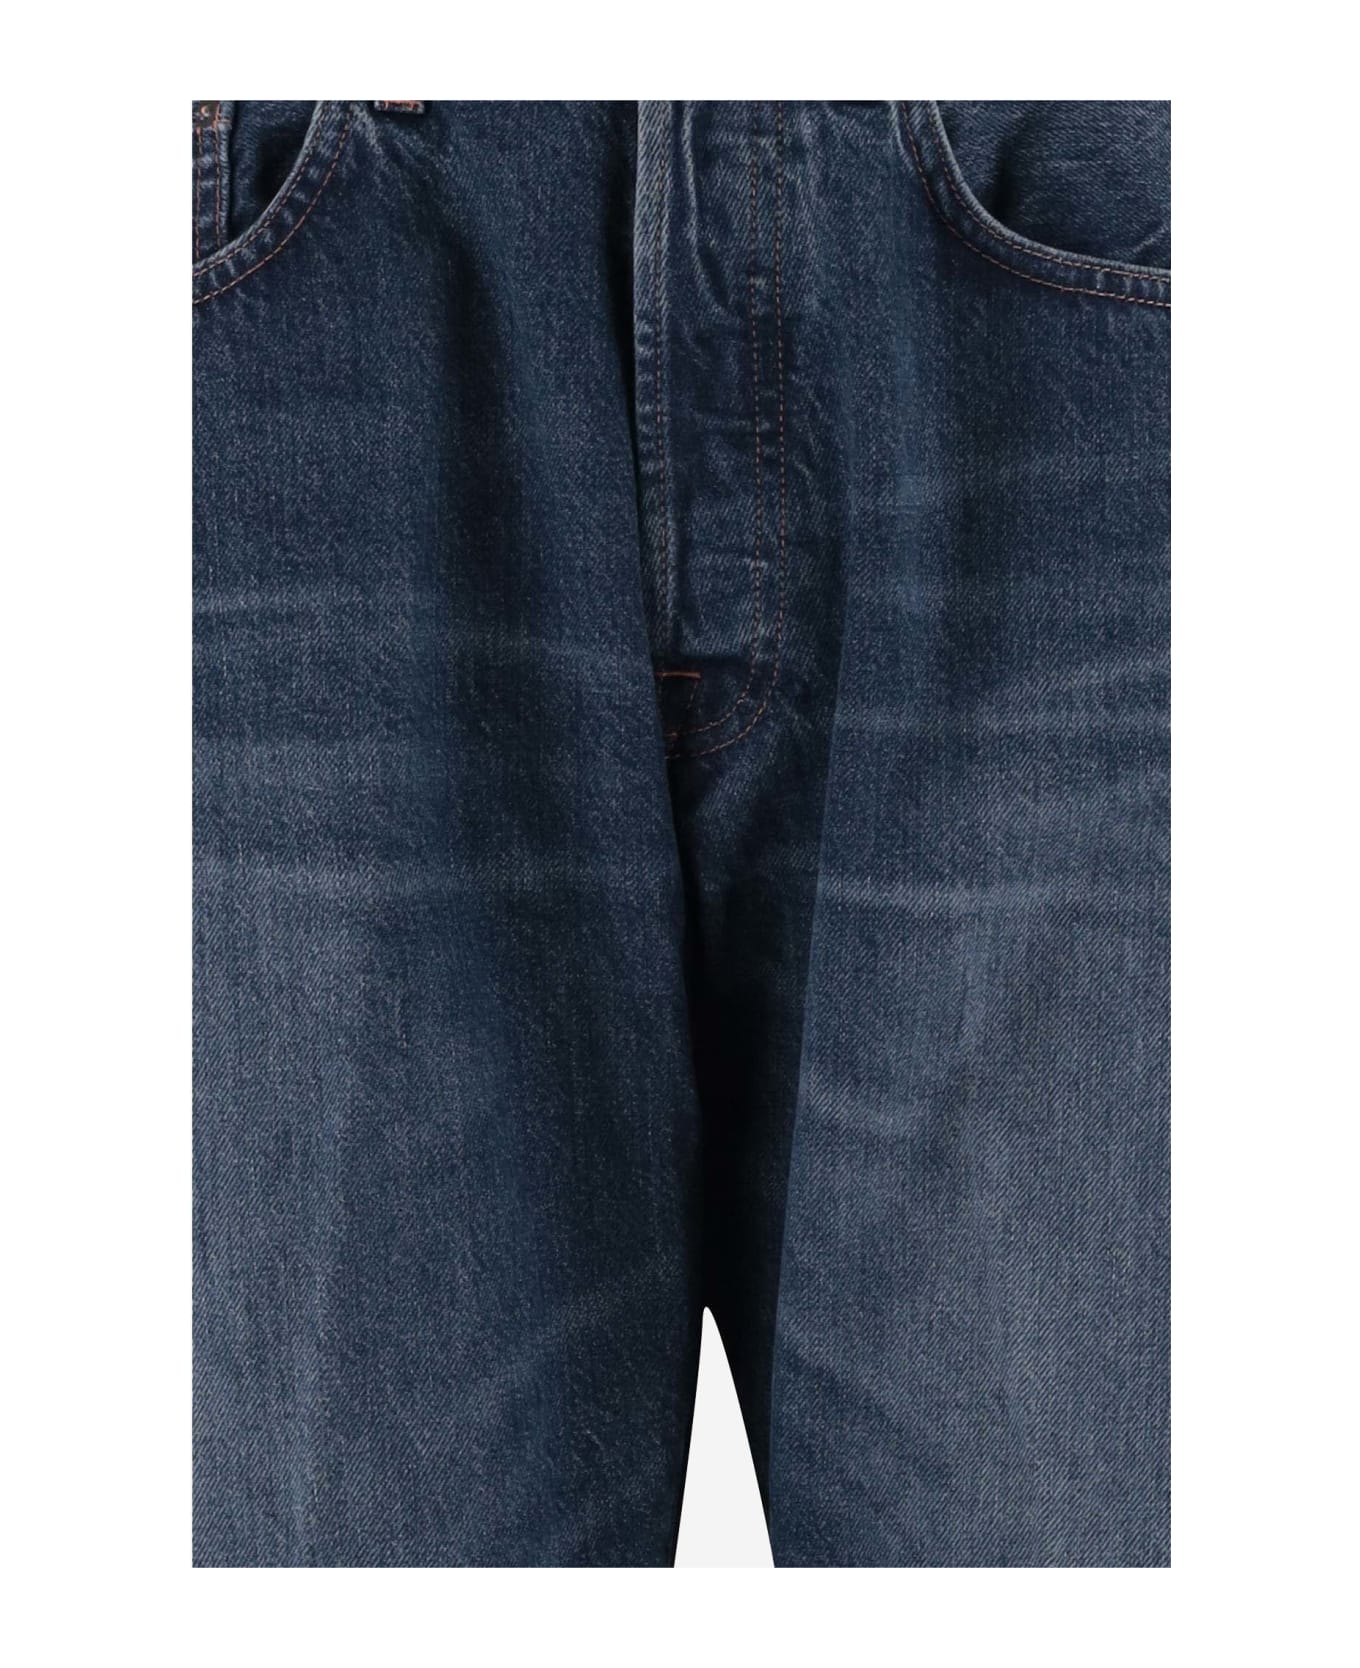 Made in Tomboy Cotton Denim Jeans - Blue